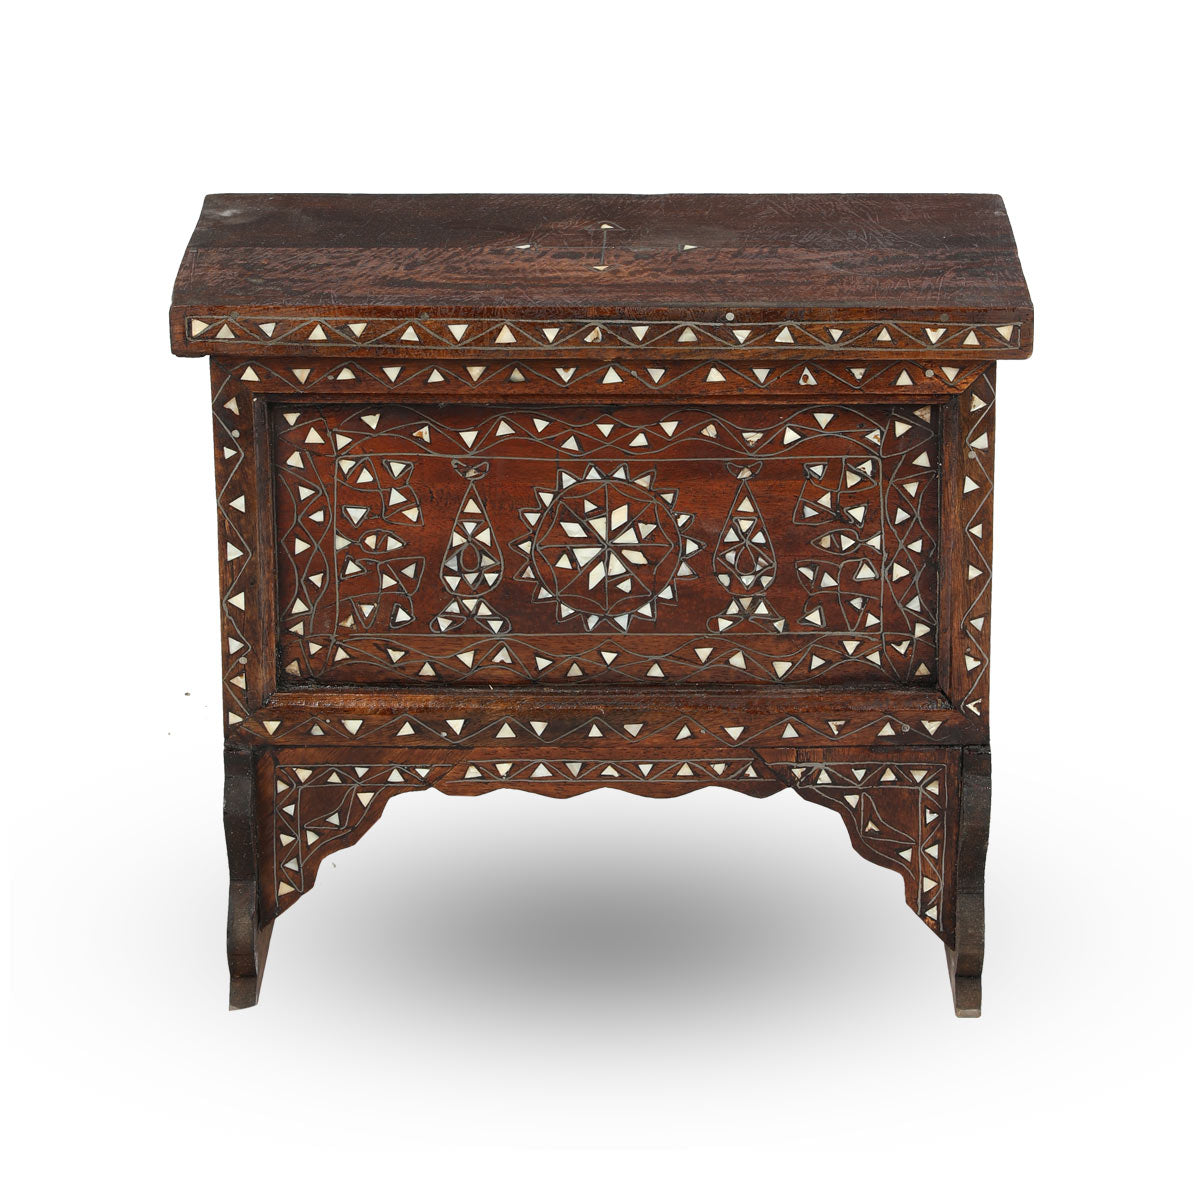 Syrian Dowry Chest - Small